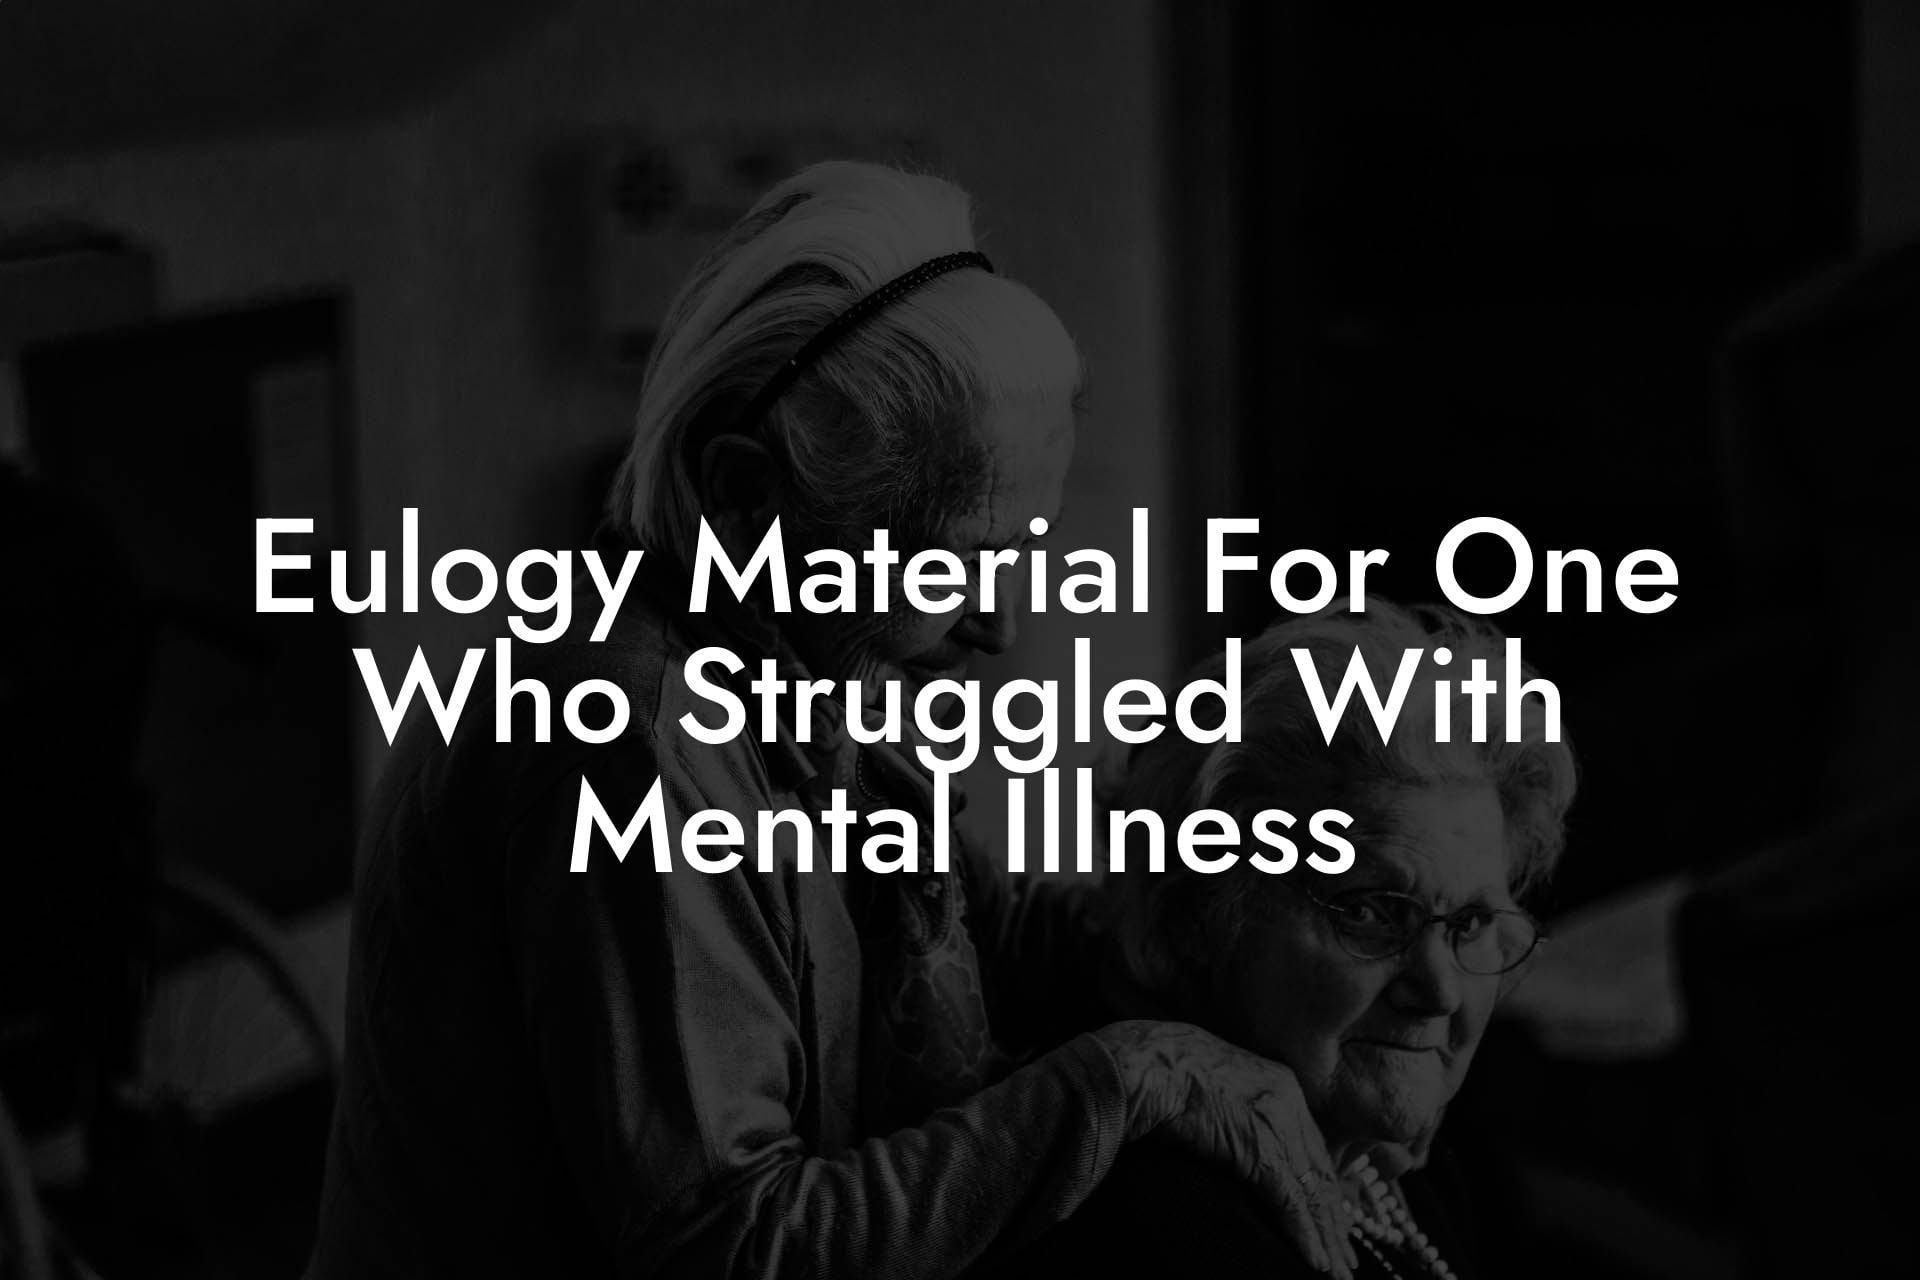 Eulogy Material For One Who Struggled With Mental Illness